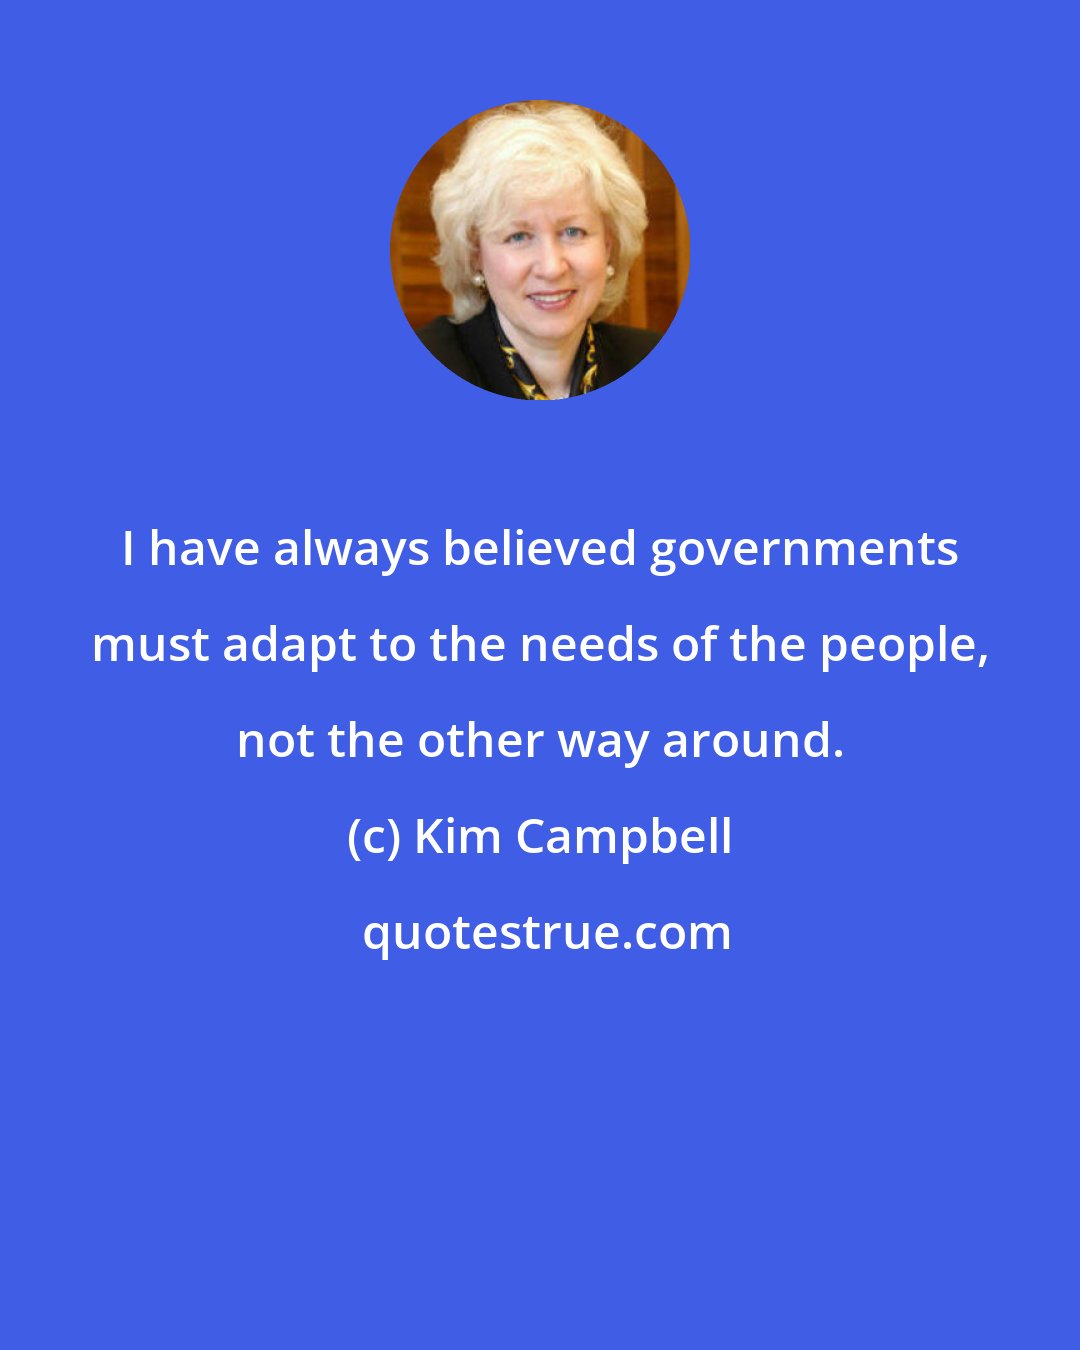 Kim Campbell: I have always believed governments must adapt to the needs of the people, not the other way around.